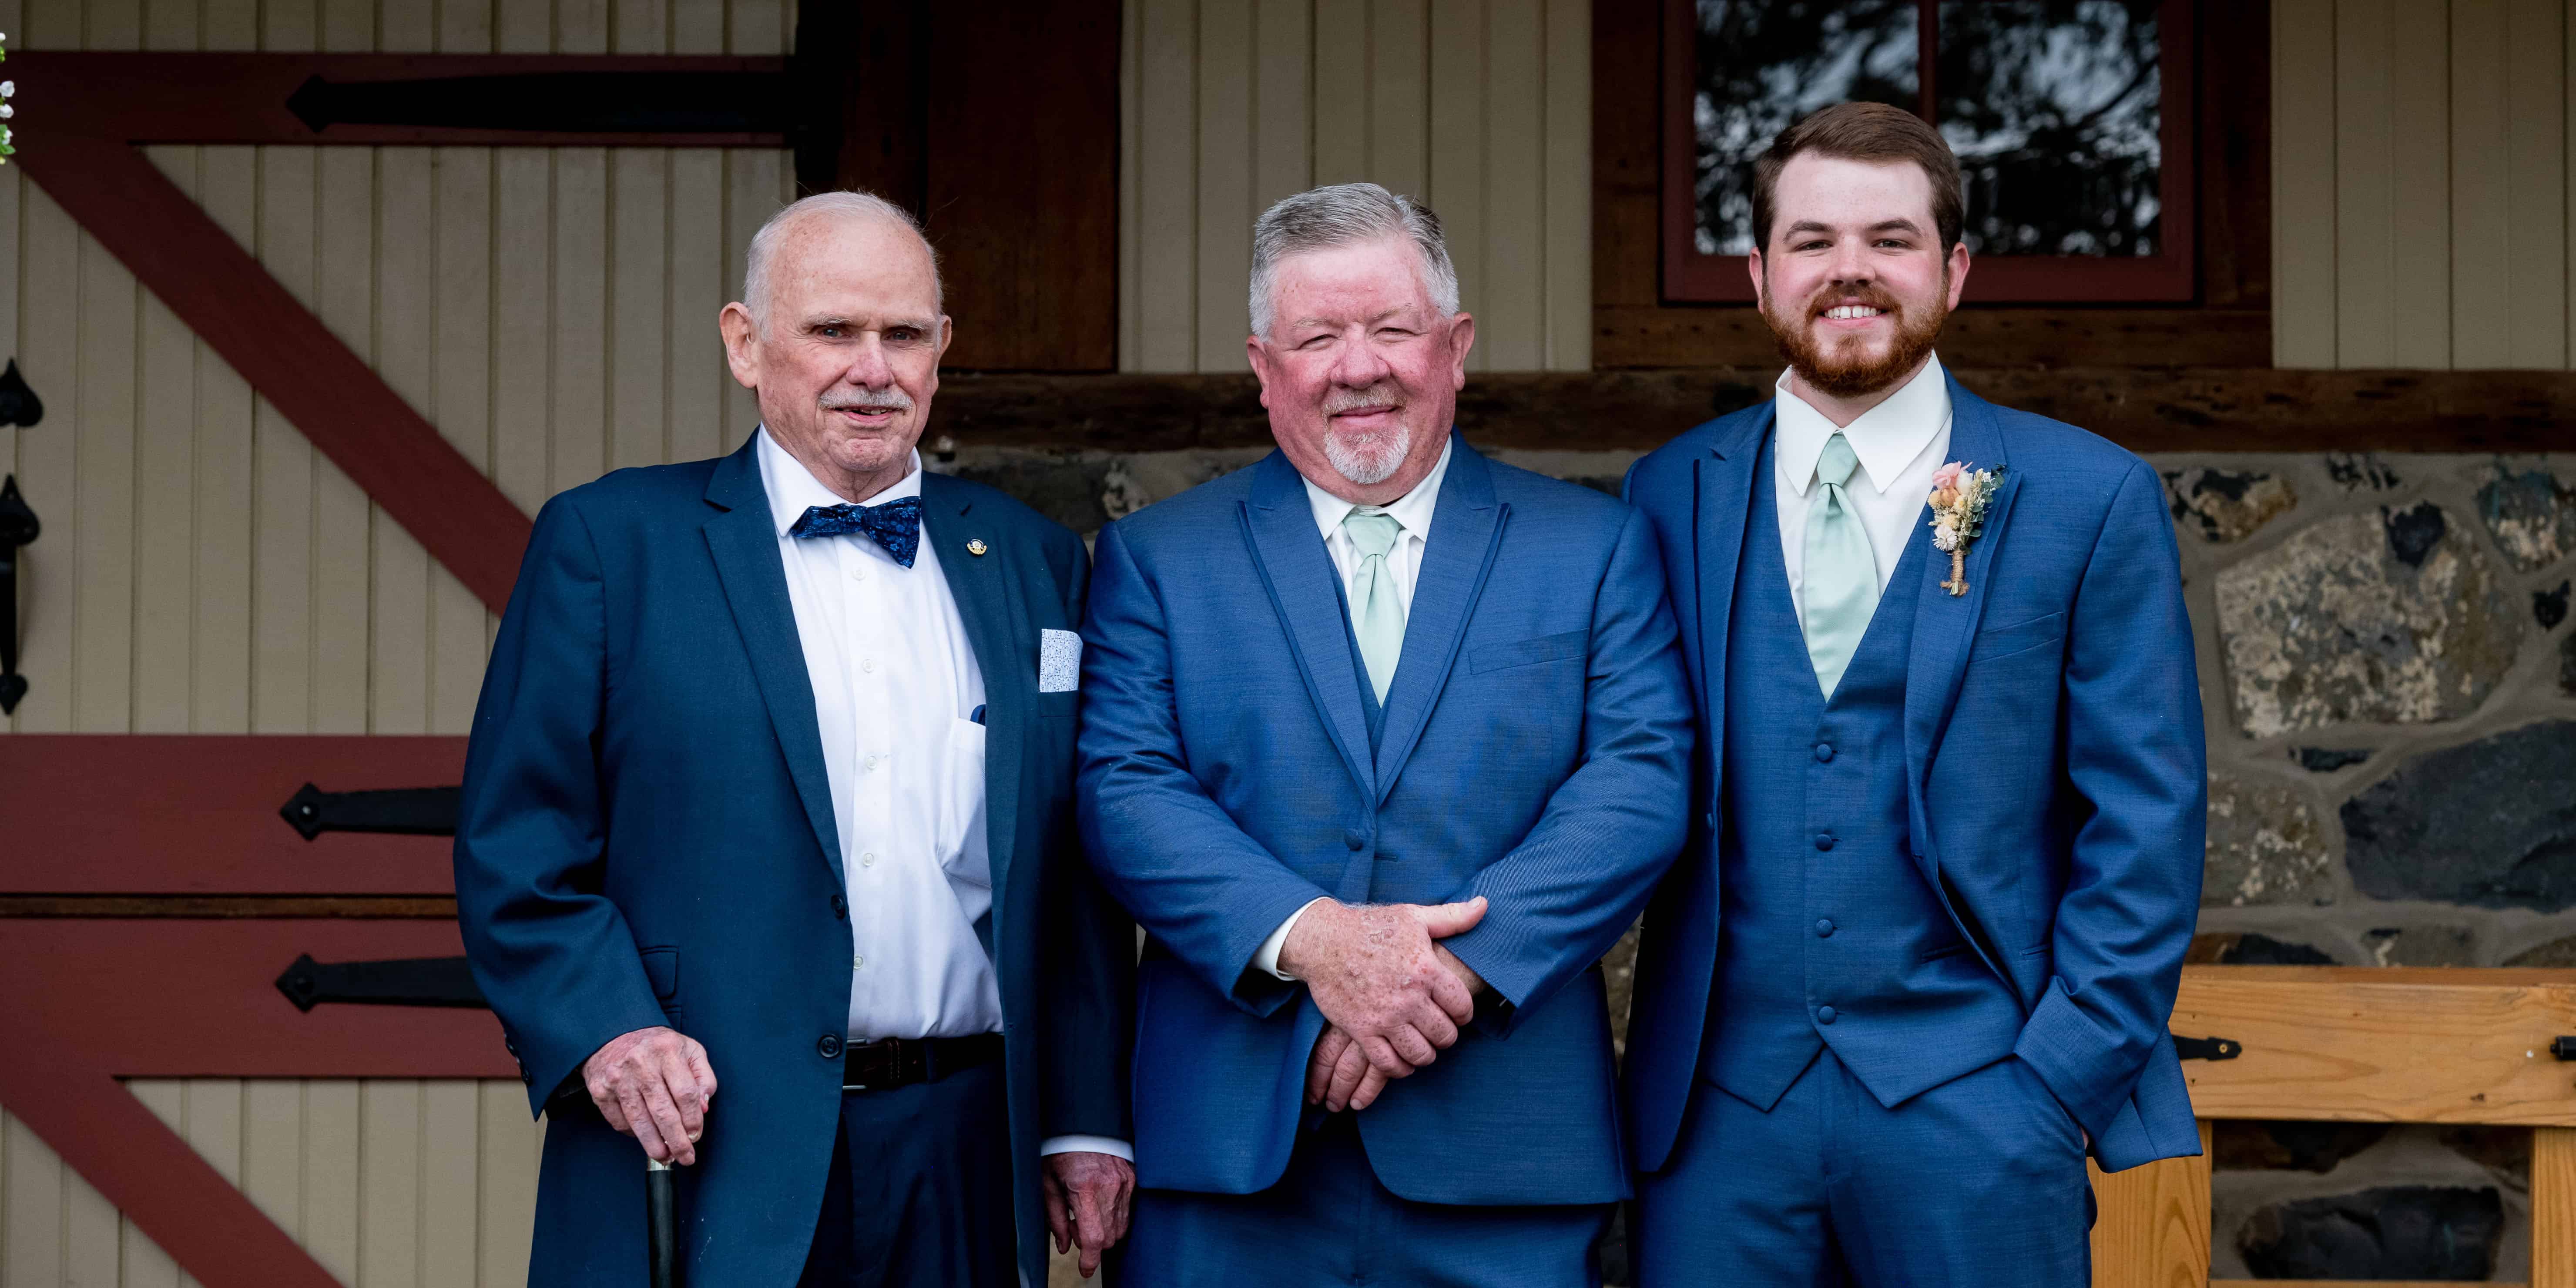 groom with dad and grandfather